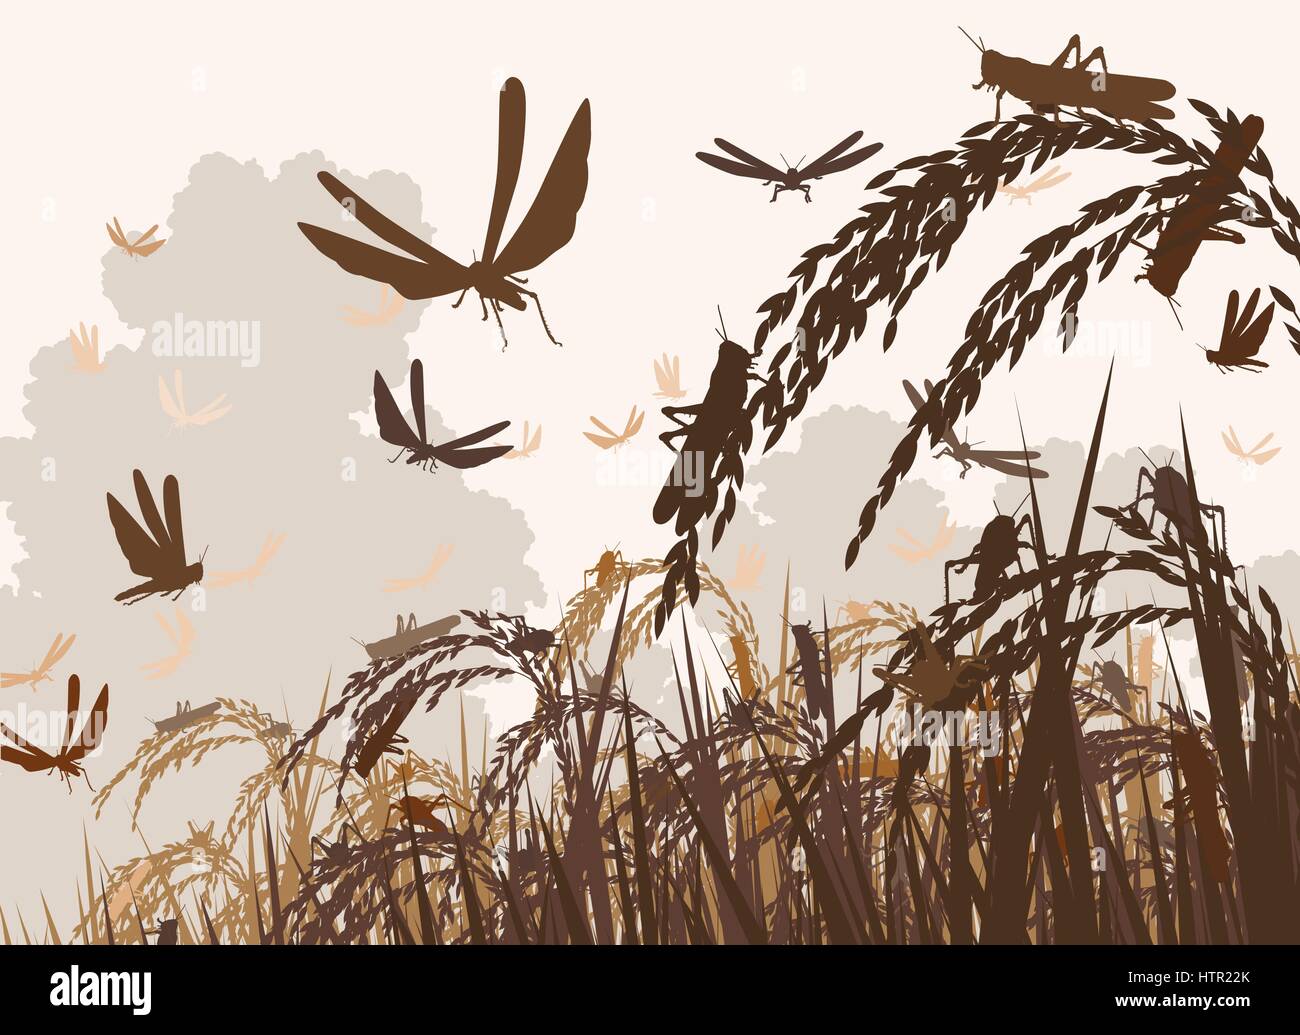 Vector illustration of a swarm of locusts attacking rice plants and threatening food security Stock Vector